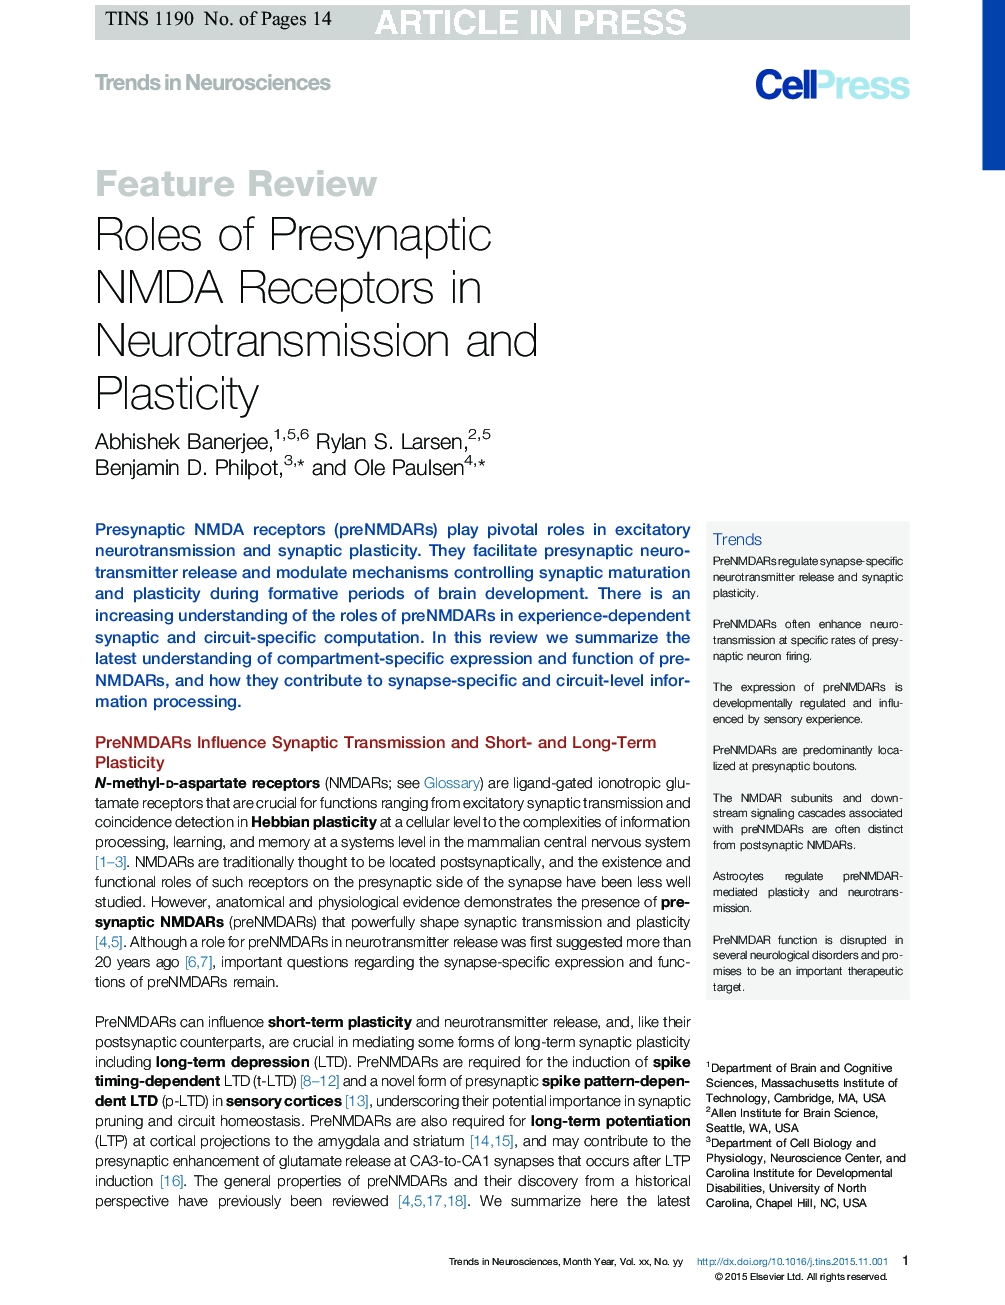 Roles of Presynaptic NMDA Receptors in Neurotransmission and Plasticity